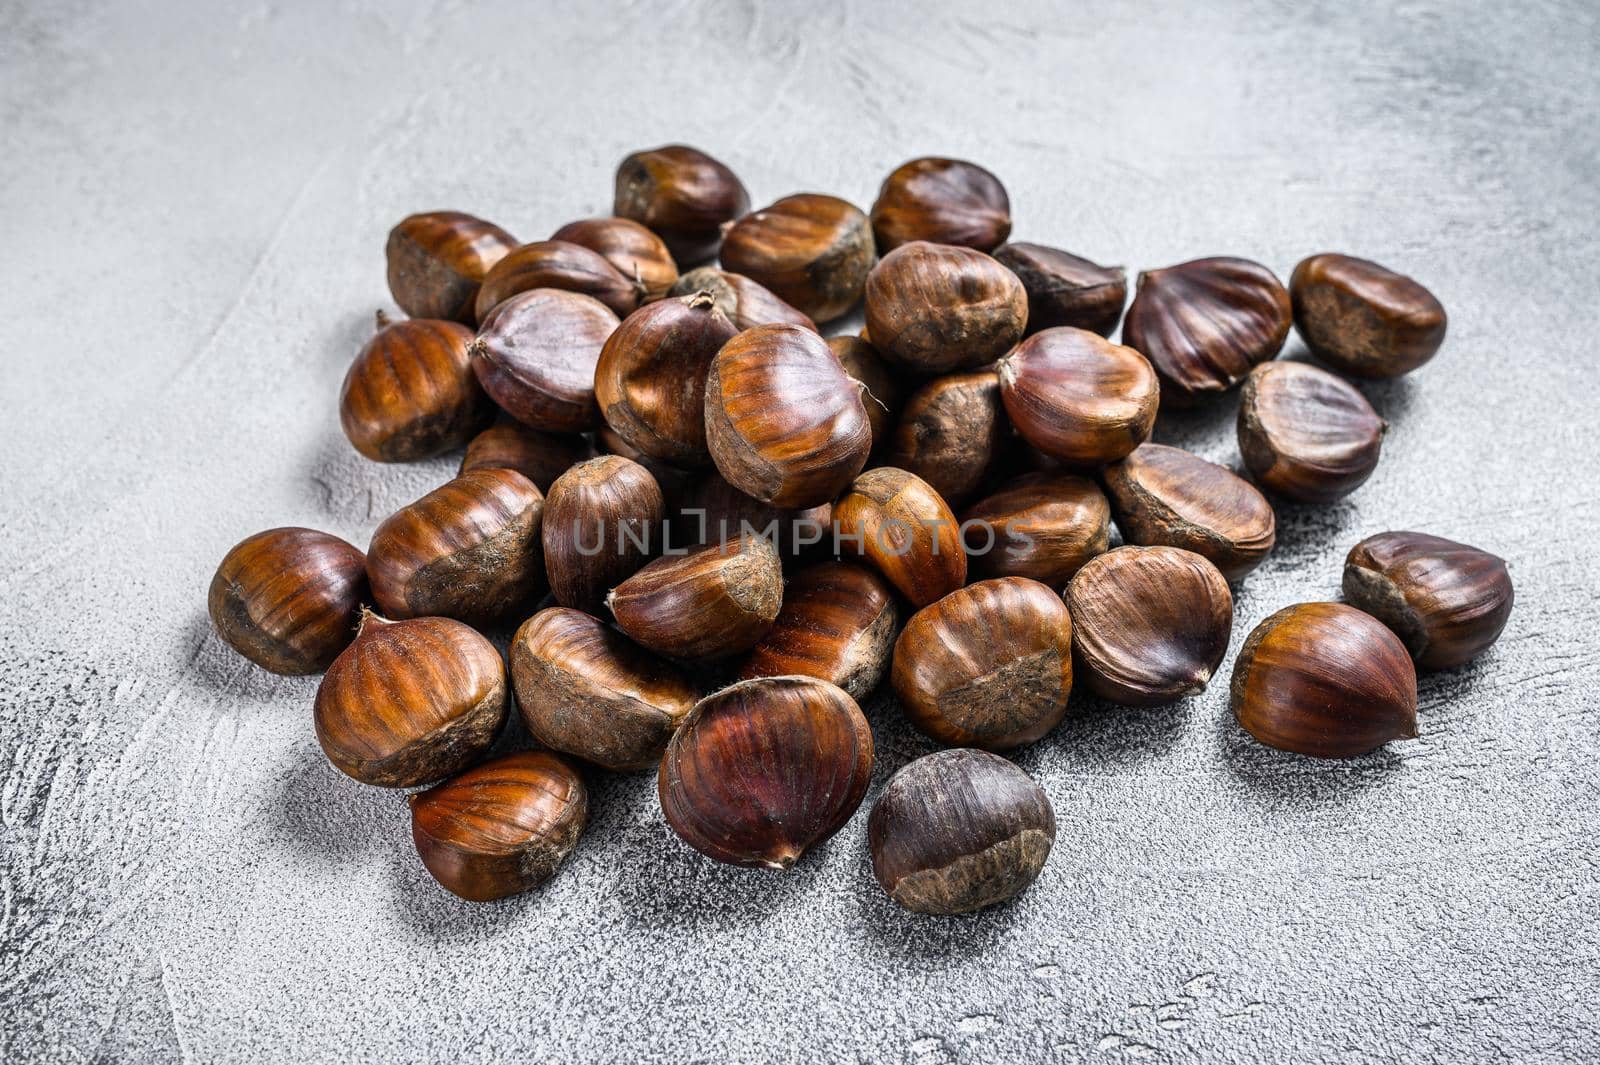 Raw chestnuts on a wooden table. White background. Top view.